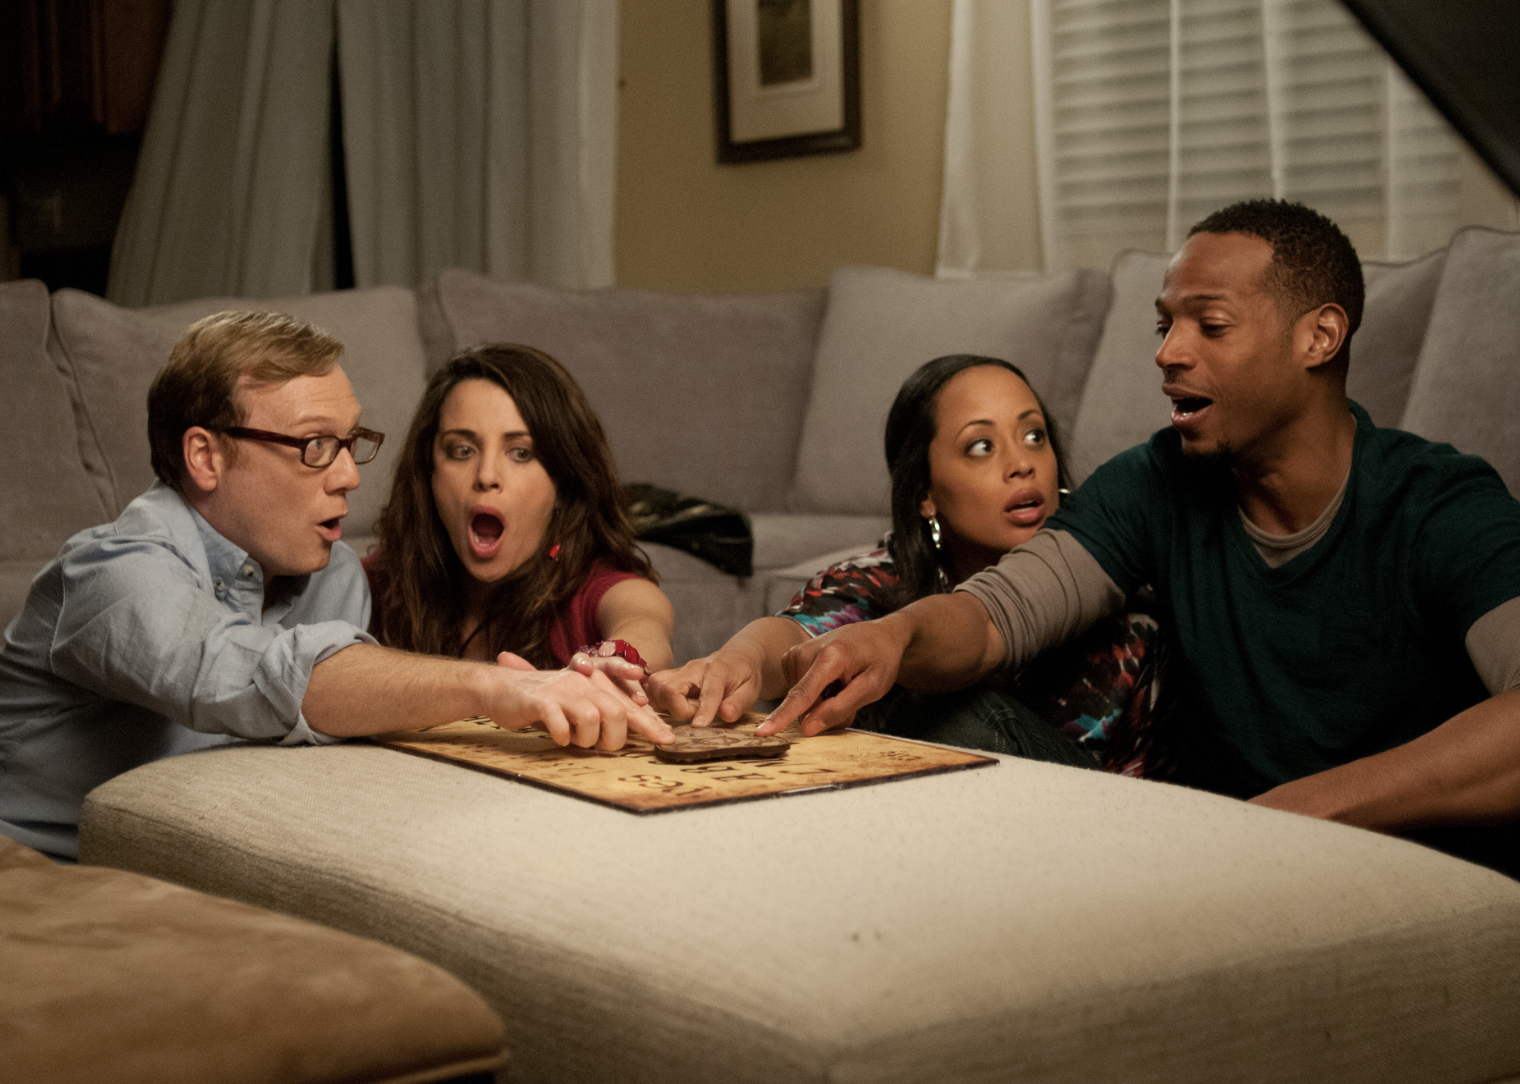 Alanna Ubach, Marlon Wayans, Essence Atkins, and Andy Daly in "A Haunted House"